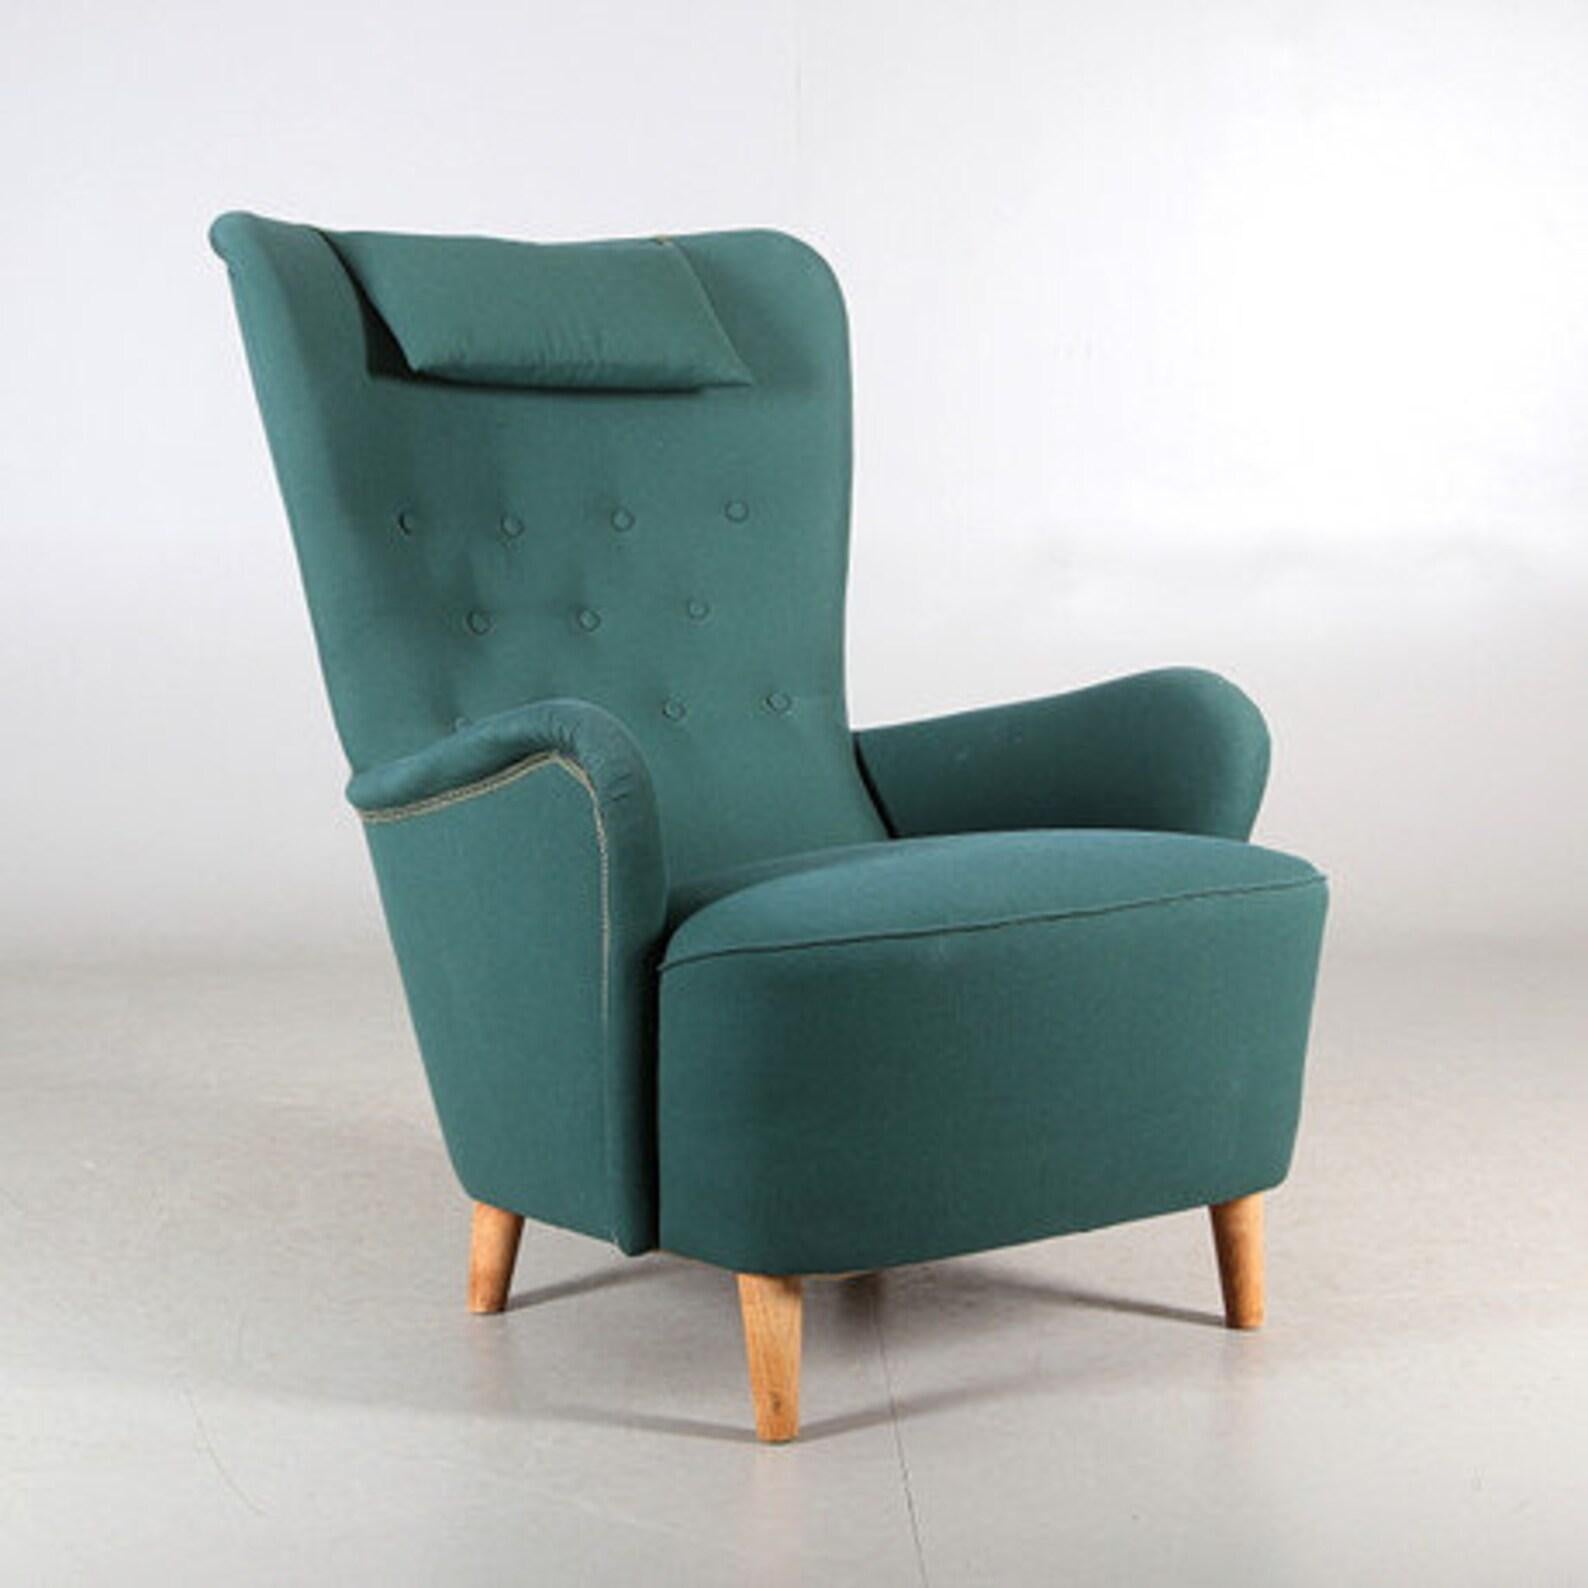 Mid-Century Modern Midcentury Lounge Chair For Sale